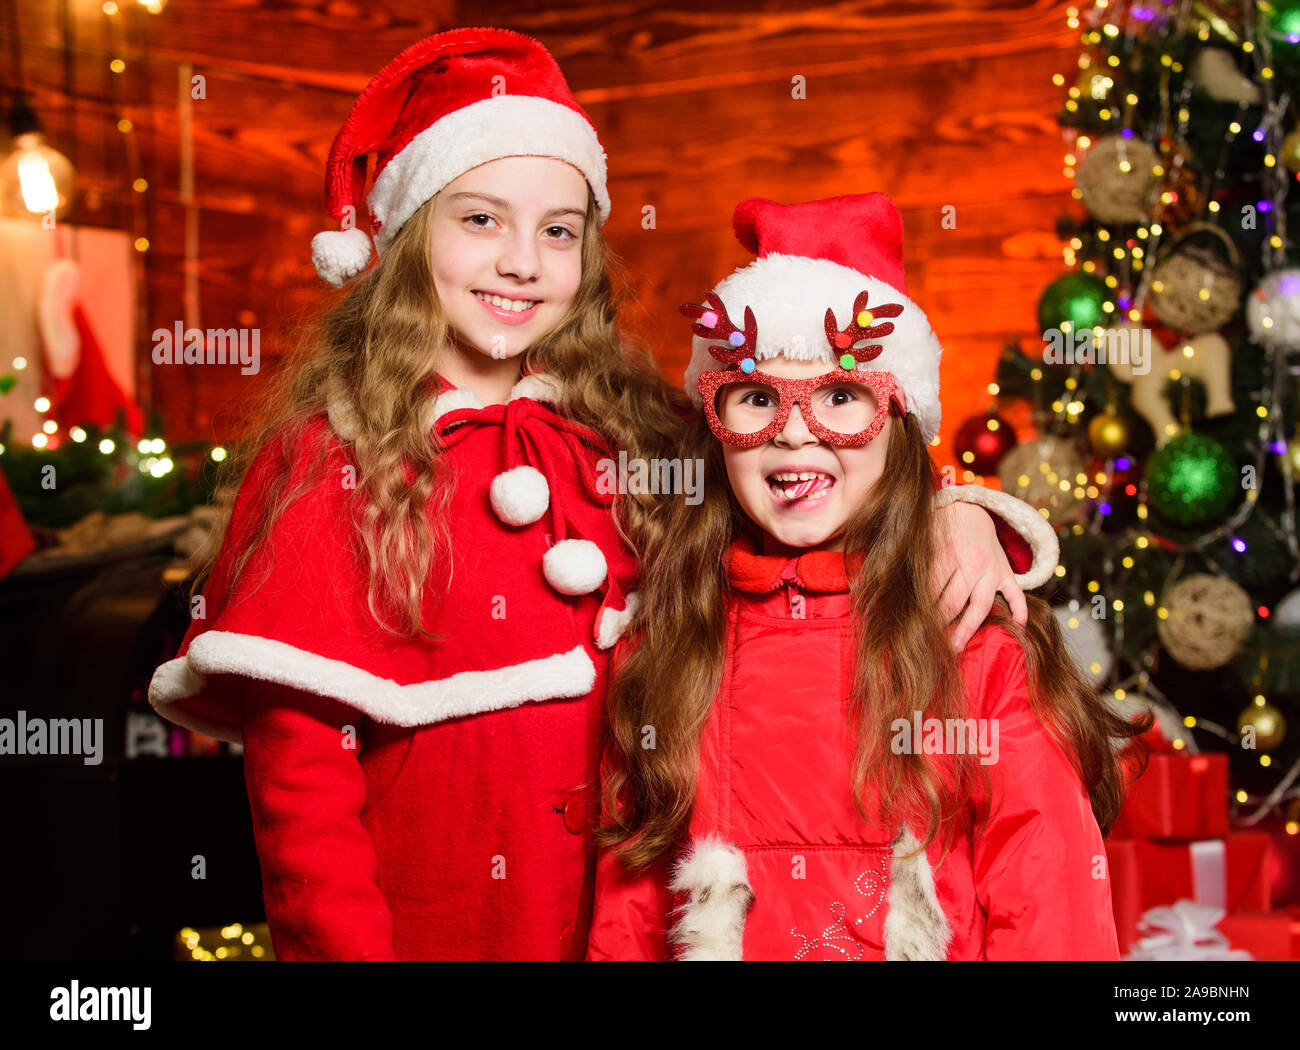 Have Fun Be Jolly And Make Good Cheer For Christmas Comes But Once A Year Cute Girls Sisters Friends Celebrate Christmas At Home Children Join Christmas Carnival Party Waiting For Santa Claus